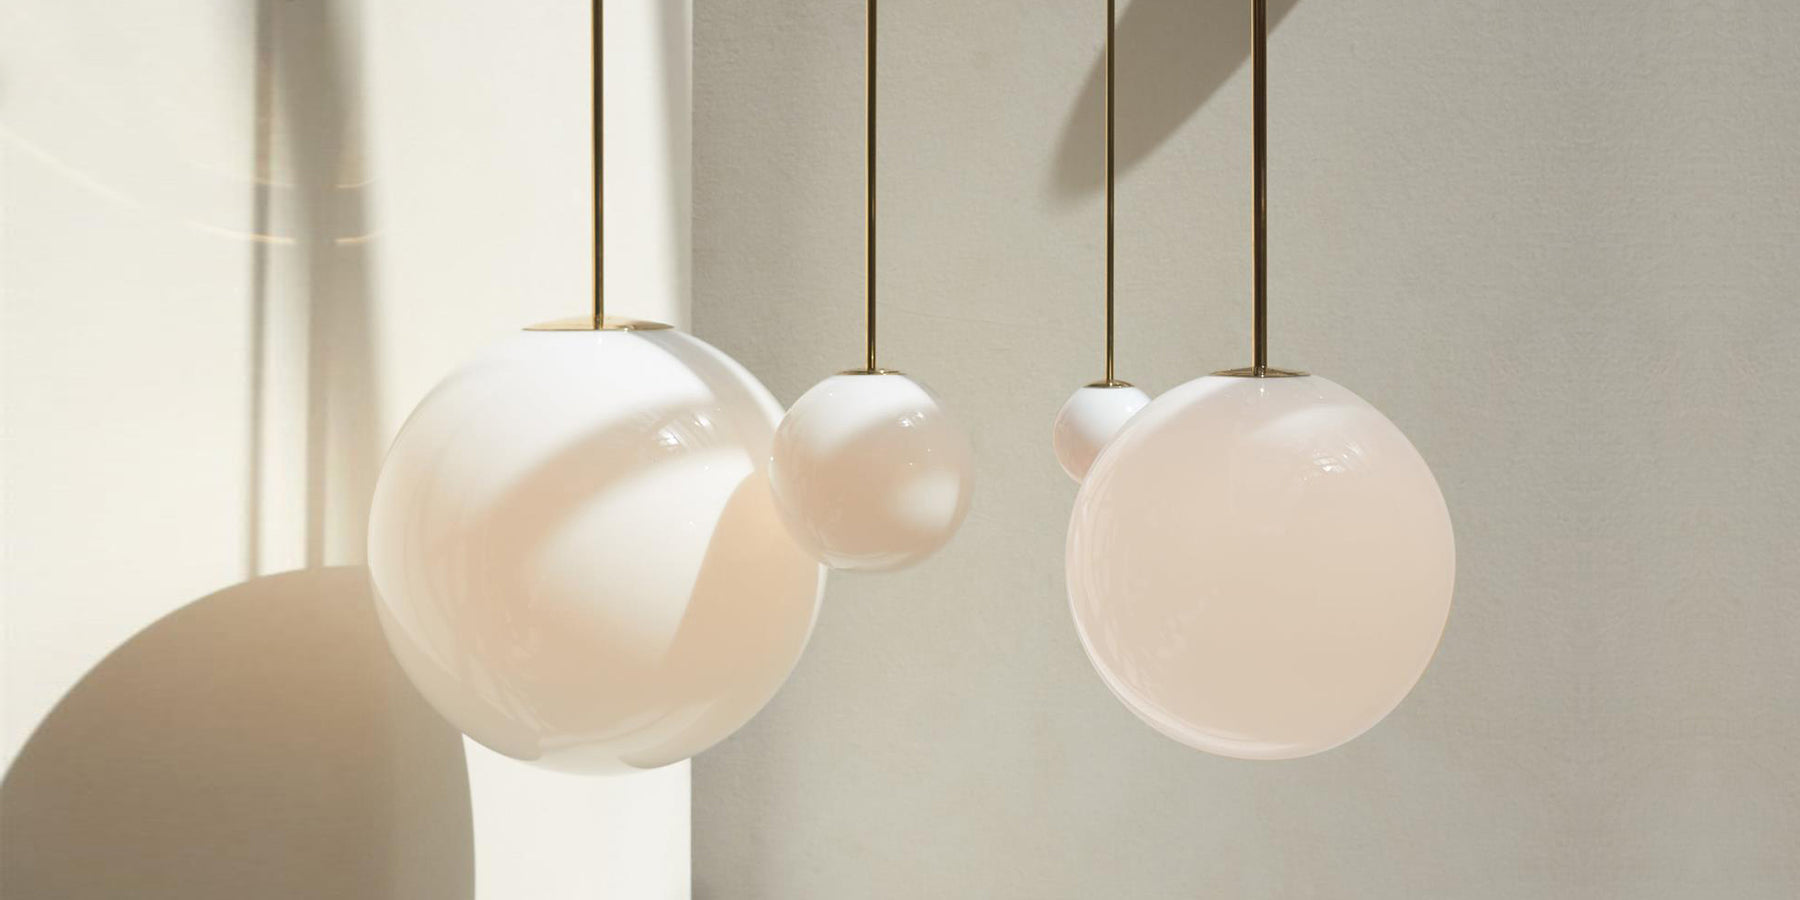 A dazzling collection of glass lights